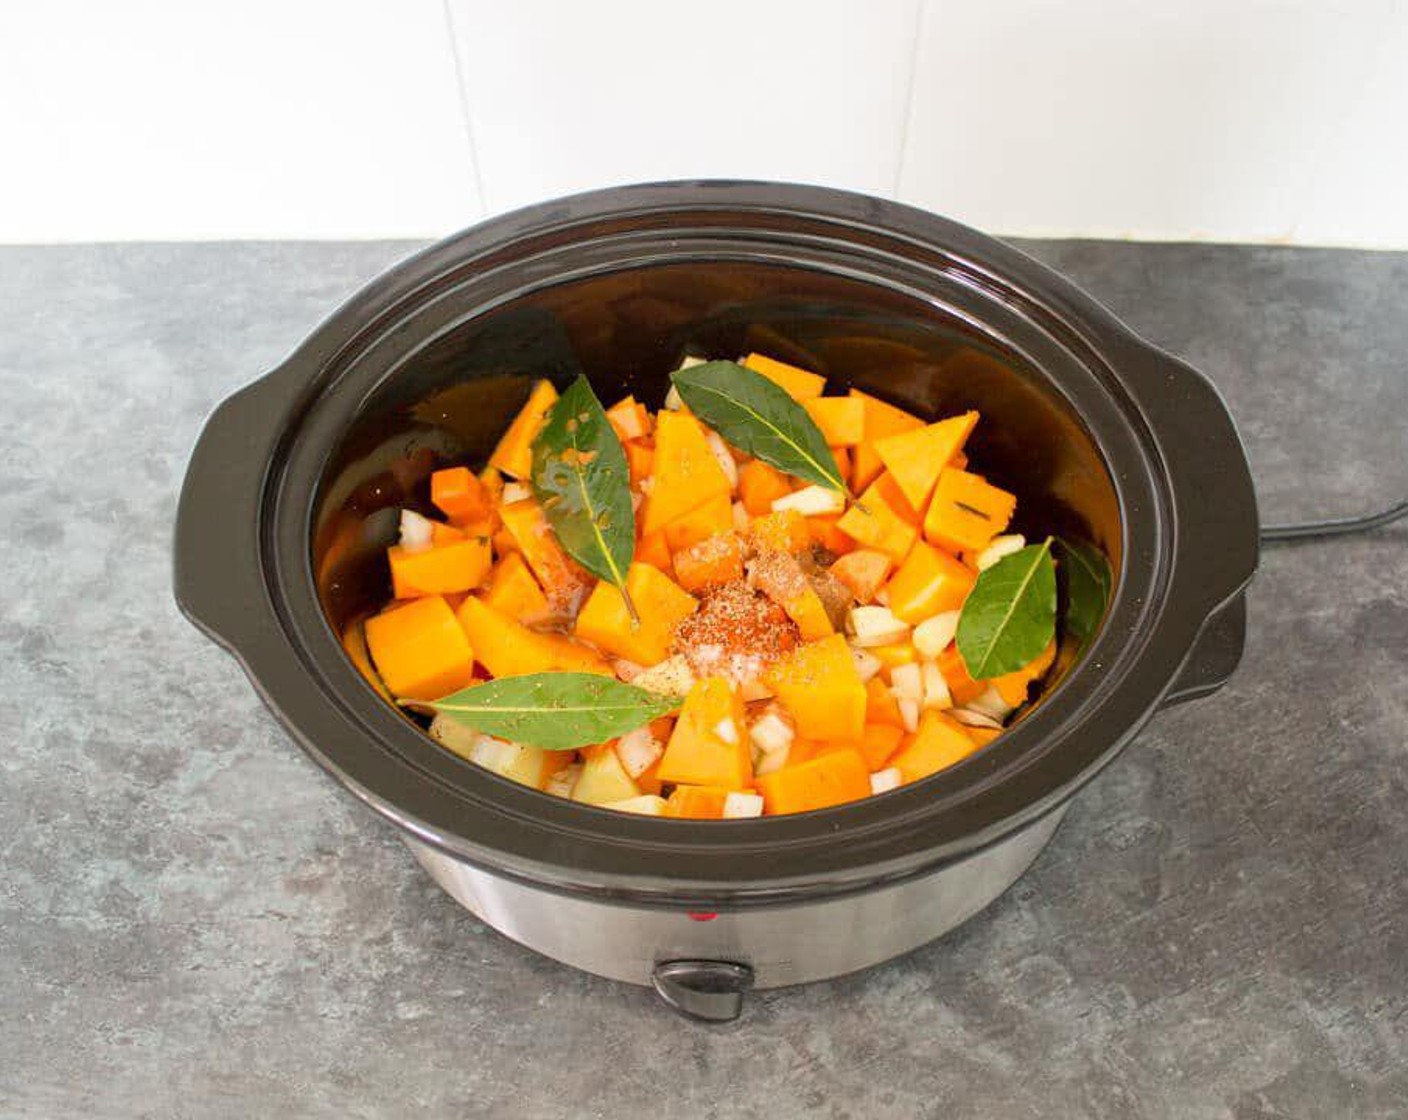 step 1 Add Butternut Squash (1), Carrot (1), Granny Smith Apple (1), Onion (1), Garlic (2 cloves) to the slow cooker, then add Vegetable Stock (2 cups), {@10:}, Ground Cinnamon (1/4 tsp), Bay Leaves (4), Ground Nutmeg (1/4 tsp), and Paprika (1/4 tsp) and give it a little mix.